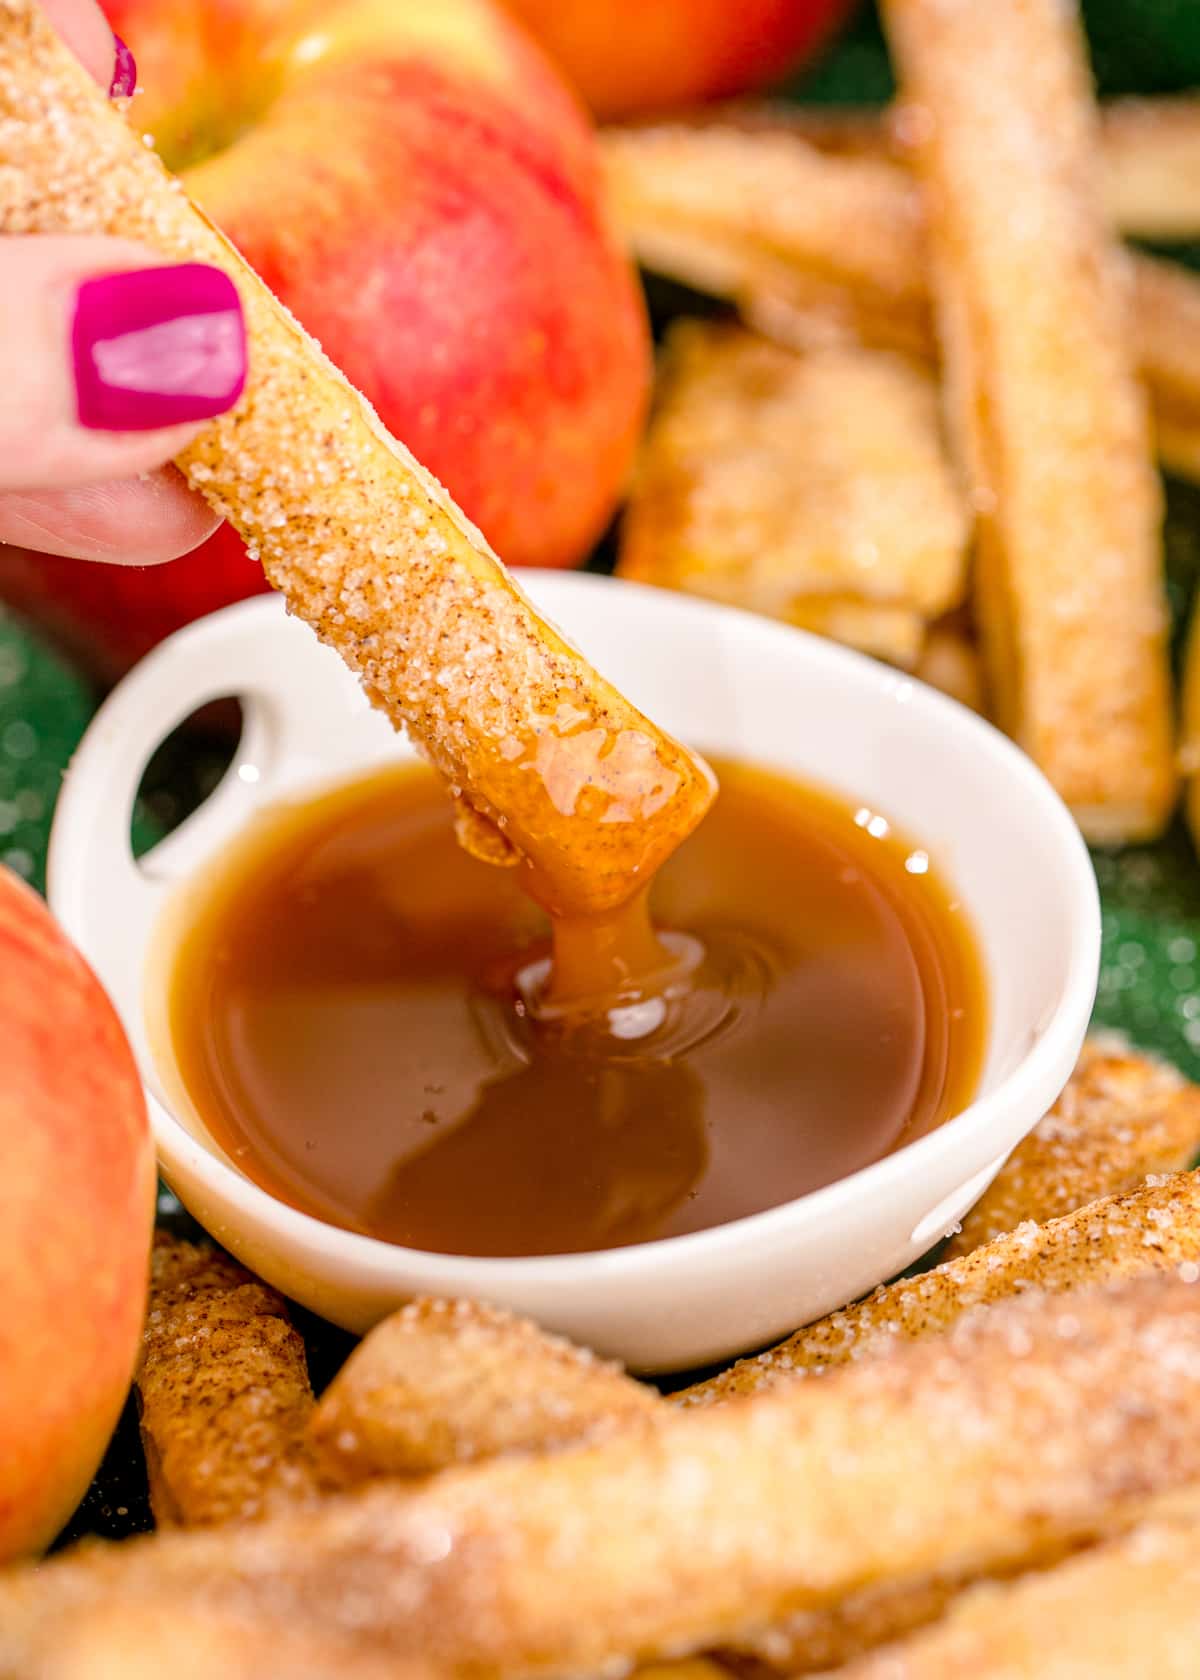 An apple pie fry being dipped into caramel sauce.